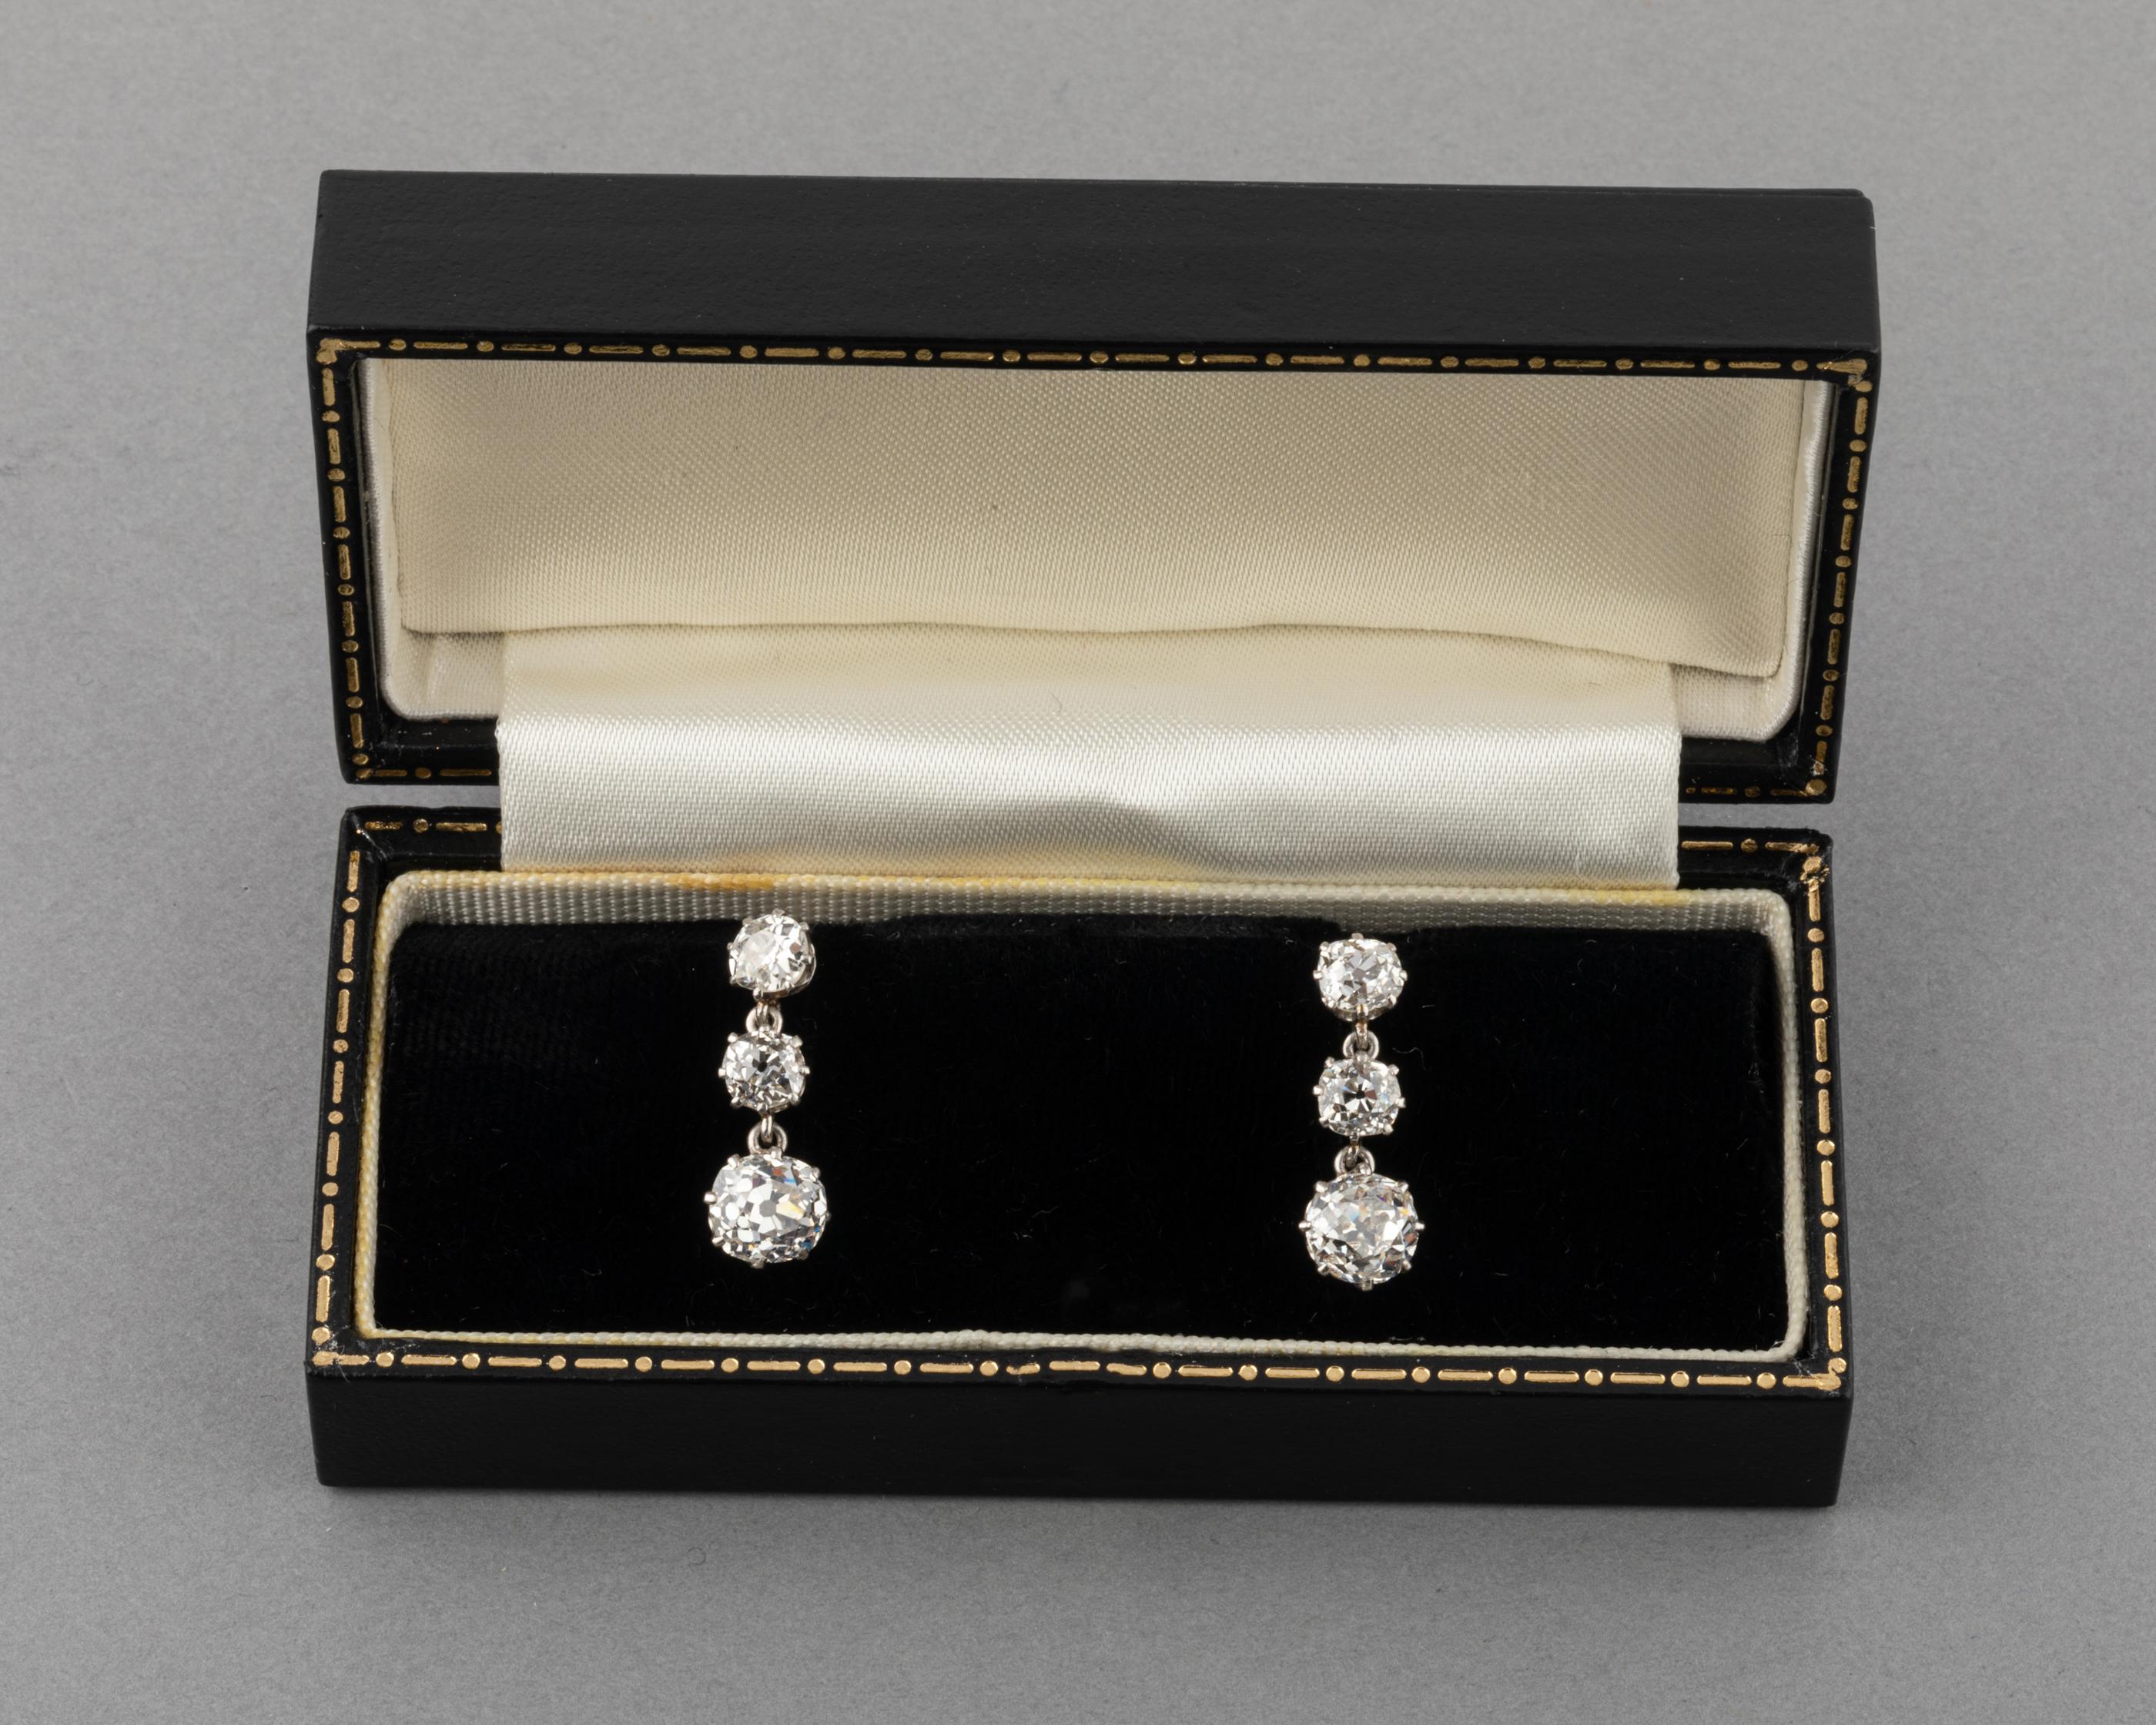 Very beautiful pair of antique earrings, made circa 1910/20.
The two principal diamonds weights 1.40 Carats each. Old cushion cut diamonds.
The quality is H/ I color, Vs clarity for one and Si for the other.
The pair is made in Gold 18k, multiple